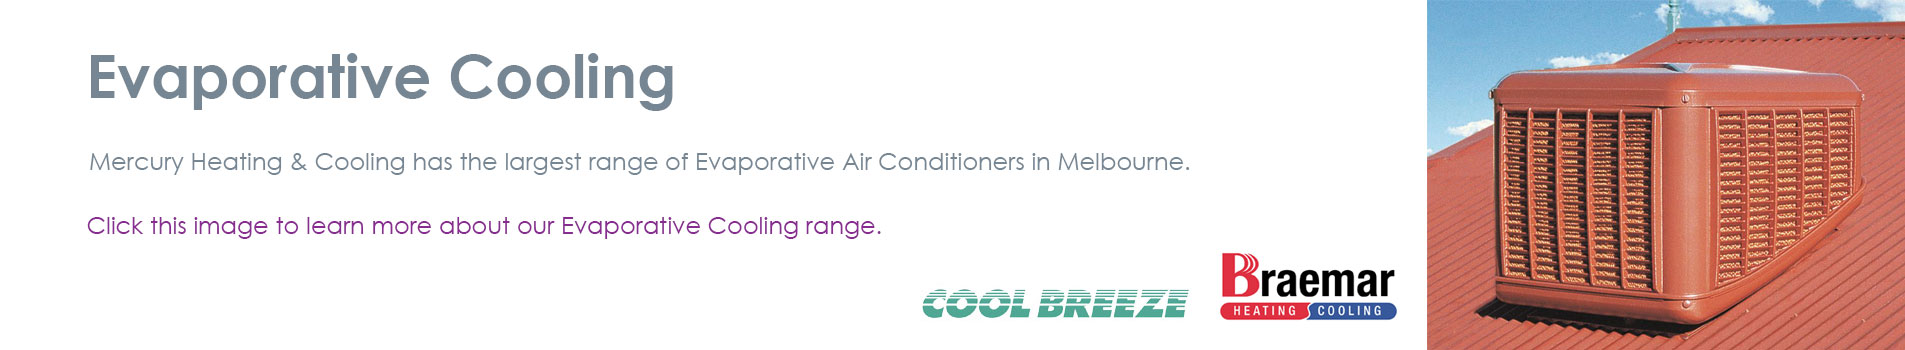 evaporative cooling melbourne at mercury heating and cooling